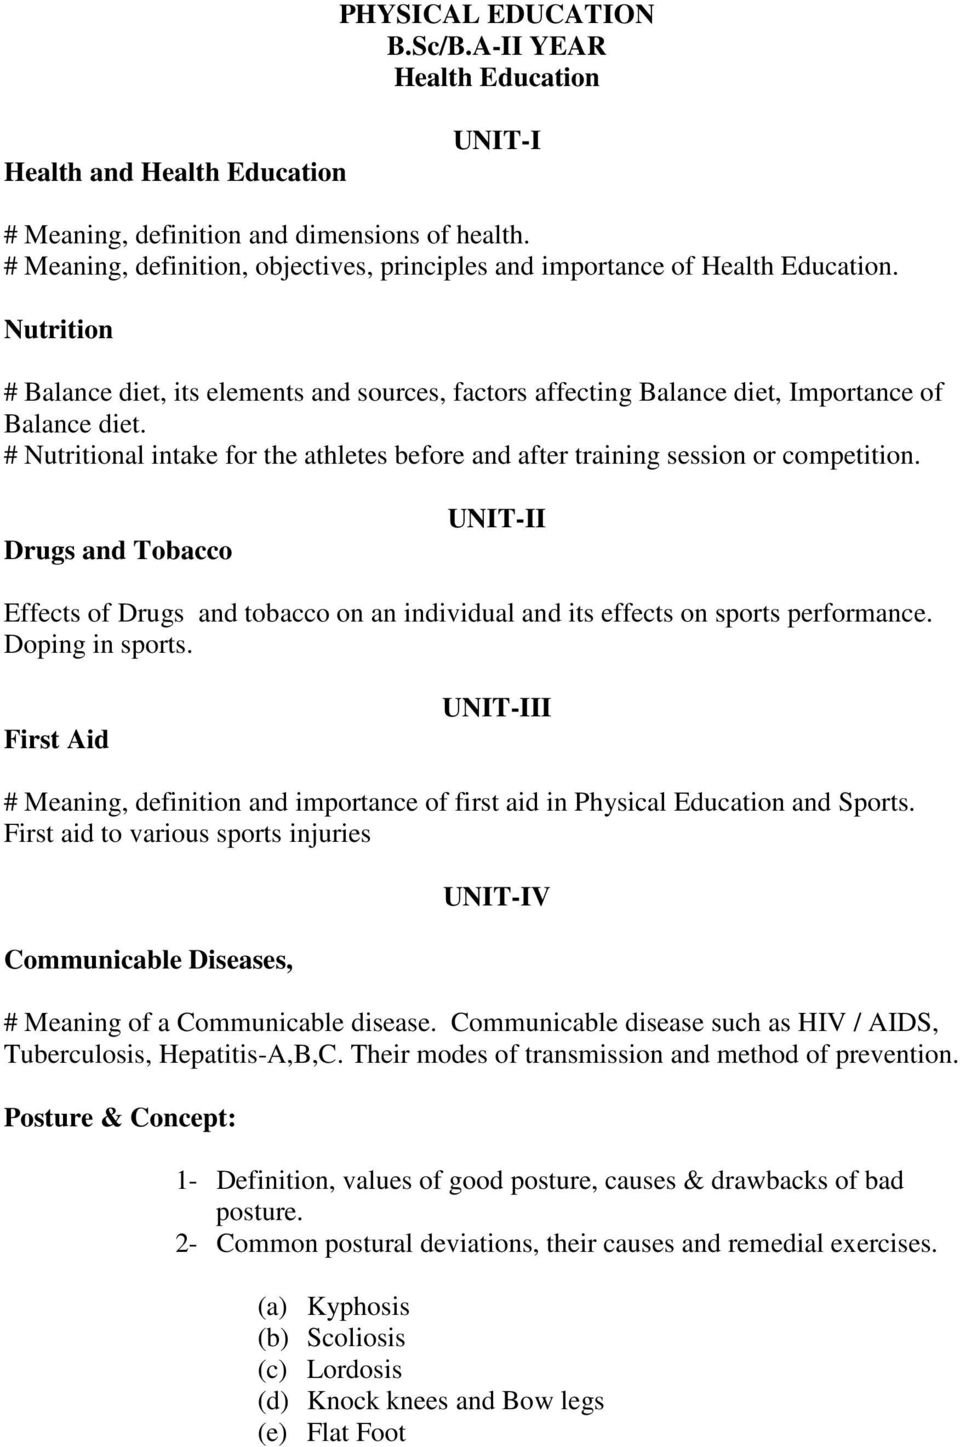 what are the objectives of physical education and its meaning